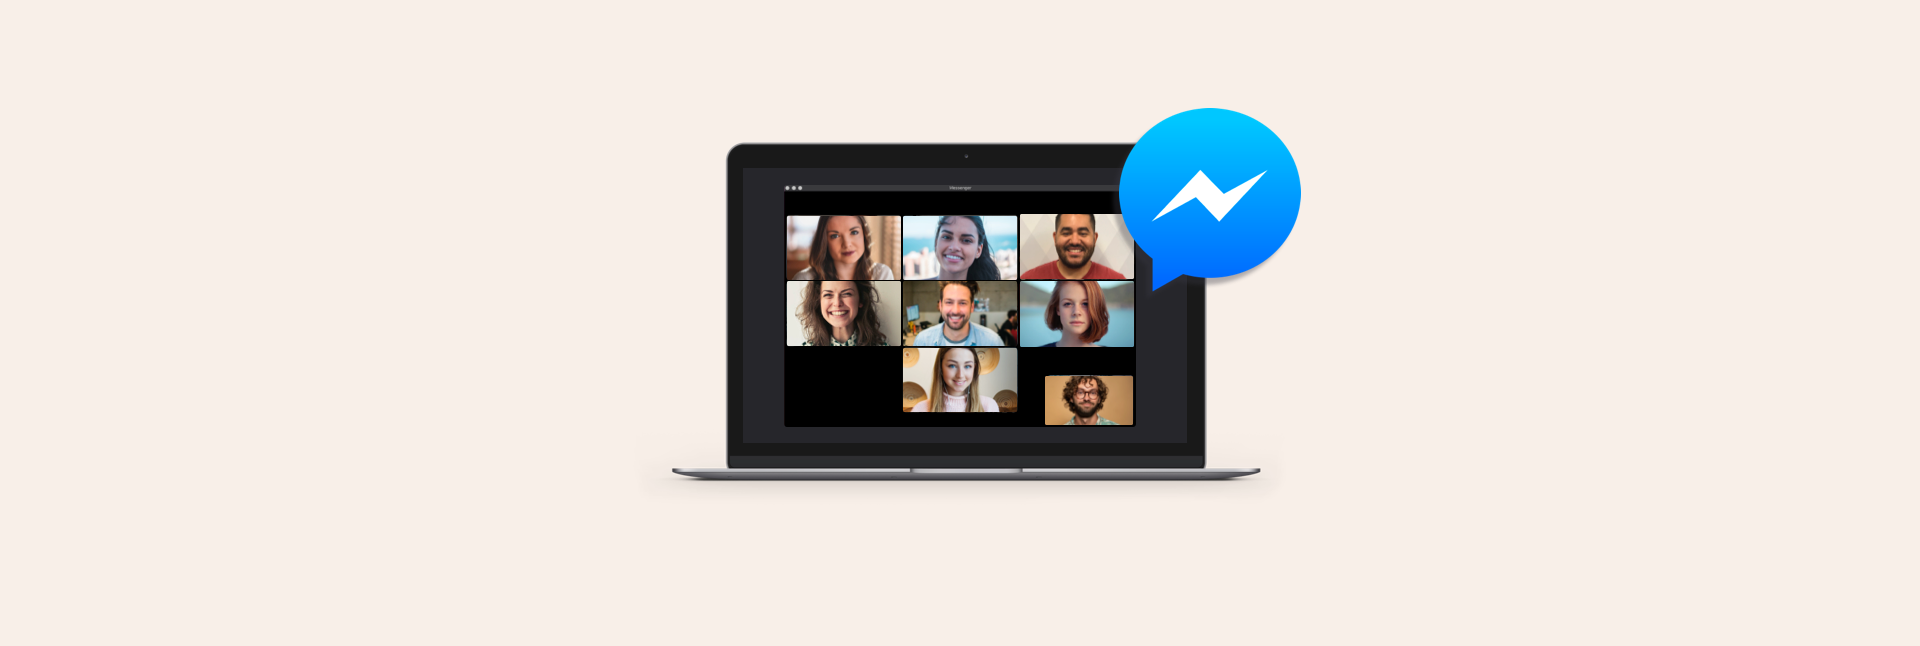 Messenger video icon facebook moving chat 27 Facebook